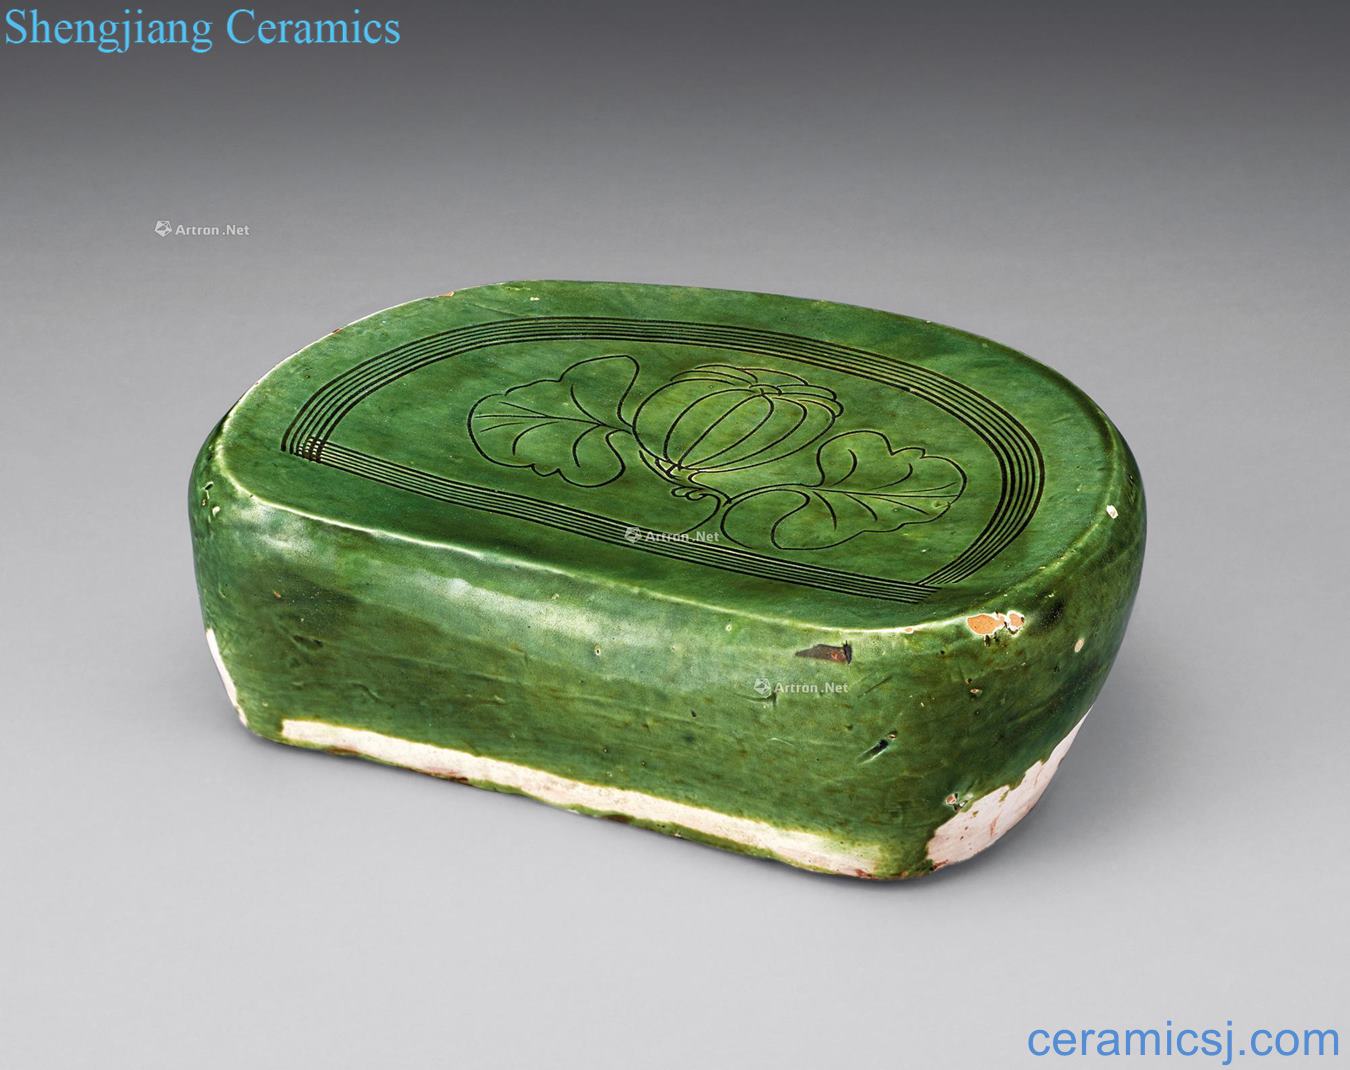 The song dynasty Green glaze carving HuaZhen